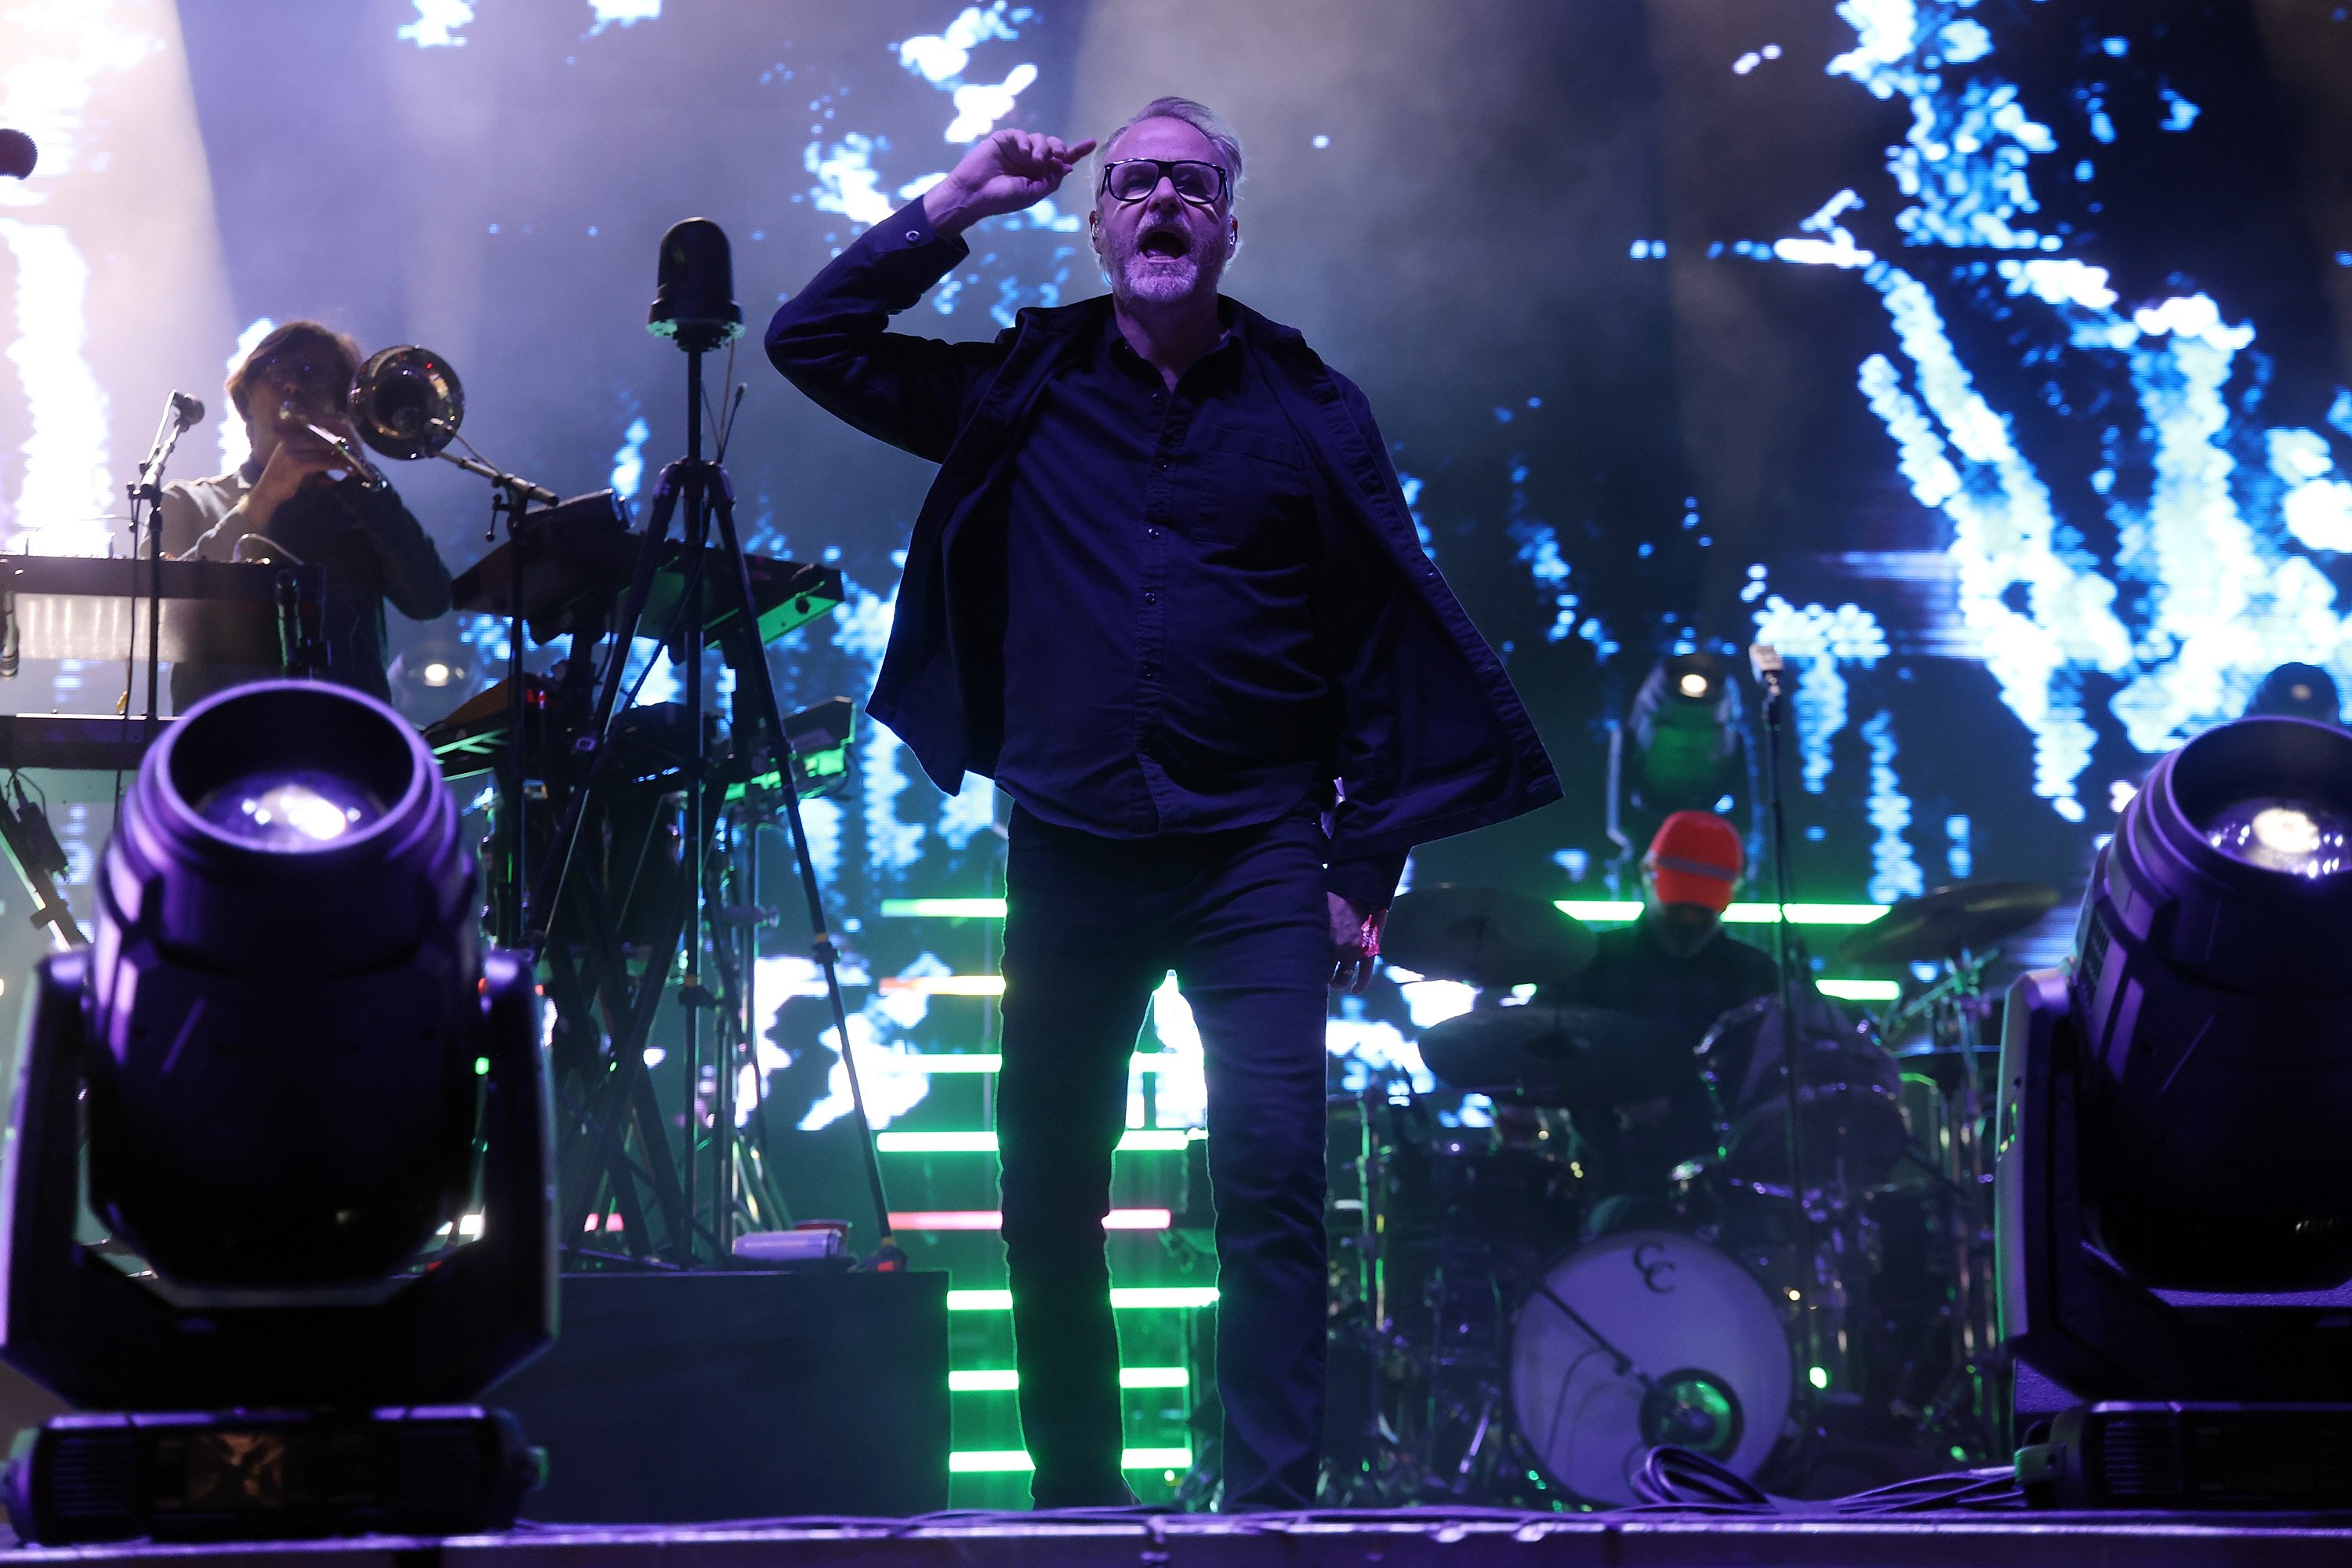 Matt Berninger of The National performs during the 2022 Sound on Sound Music Festival